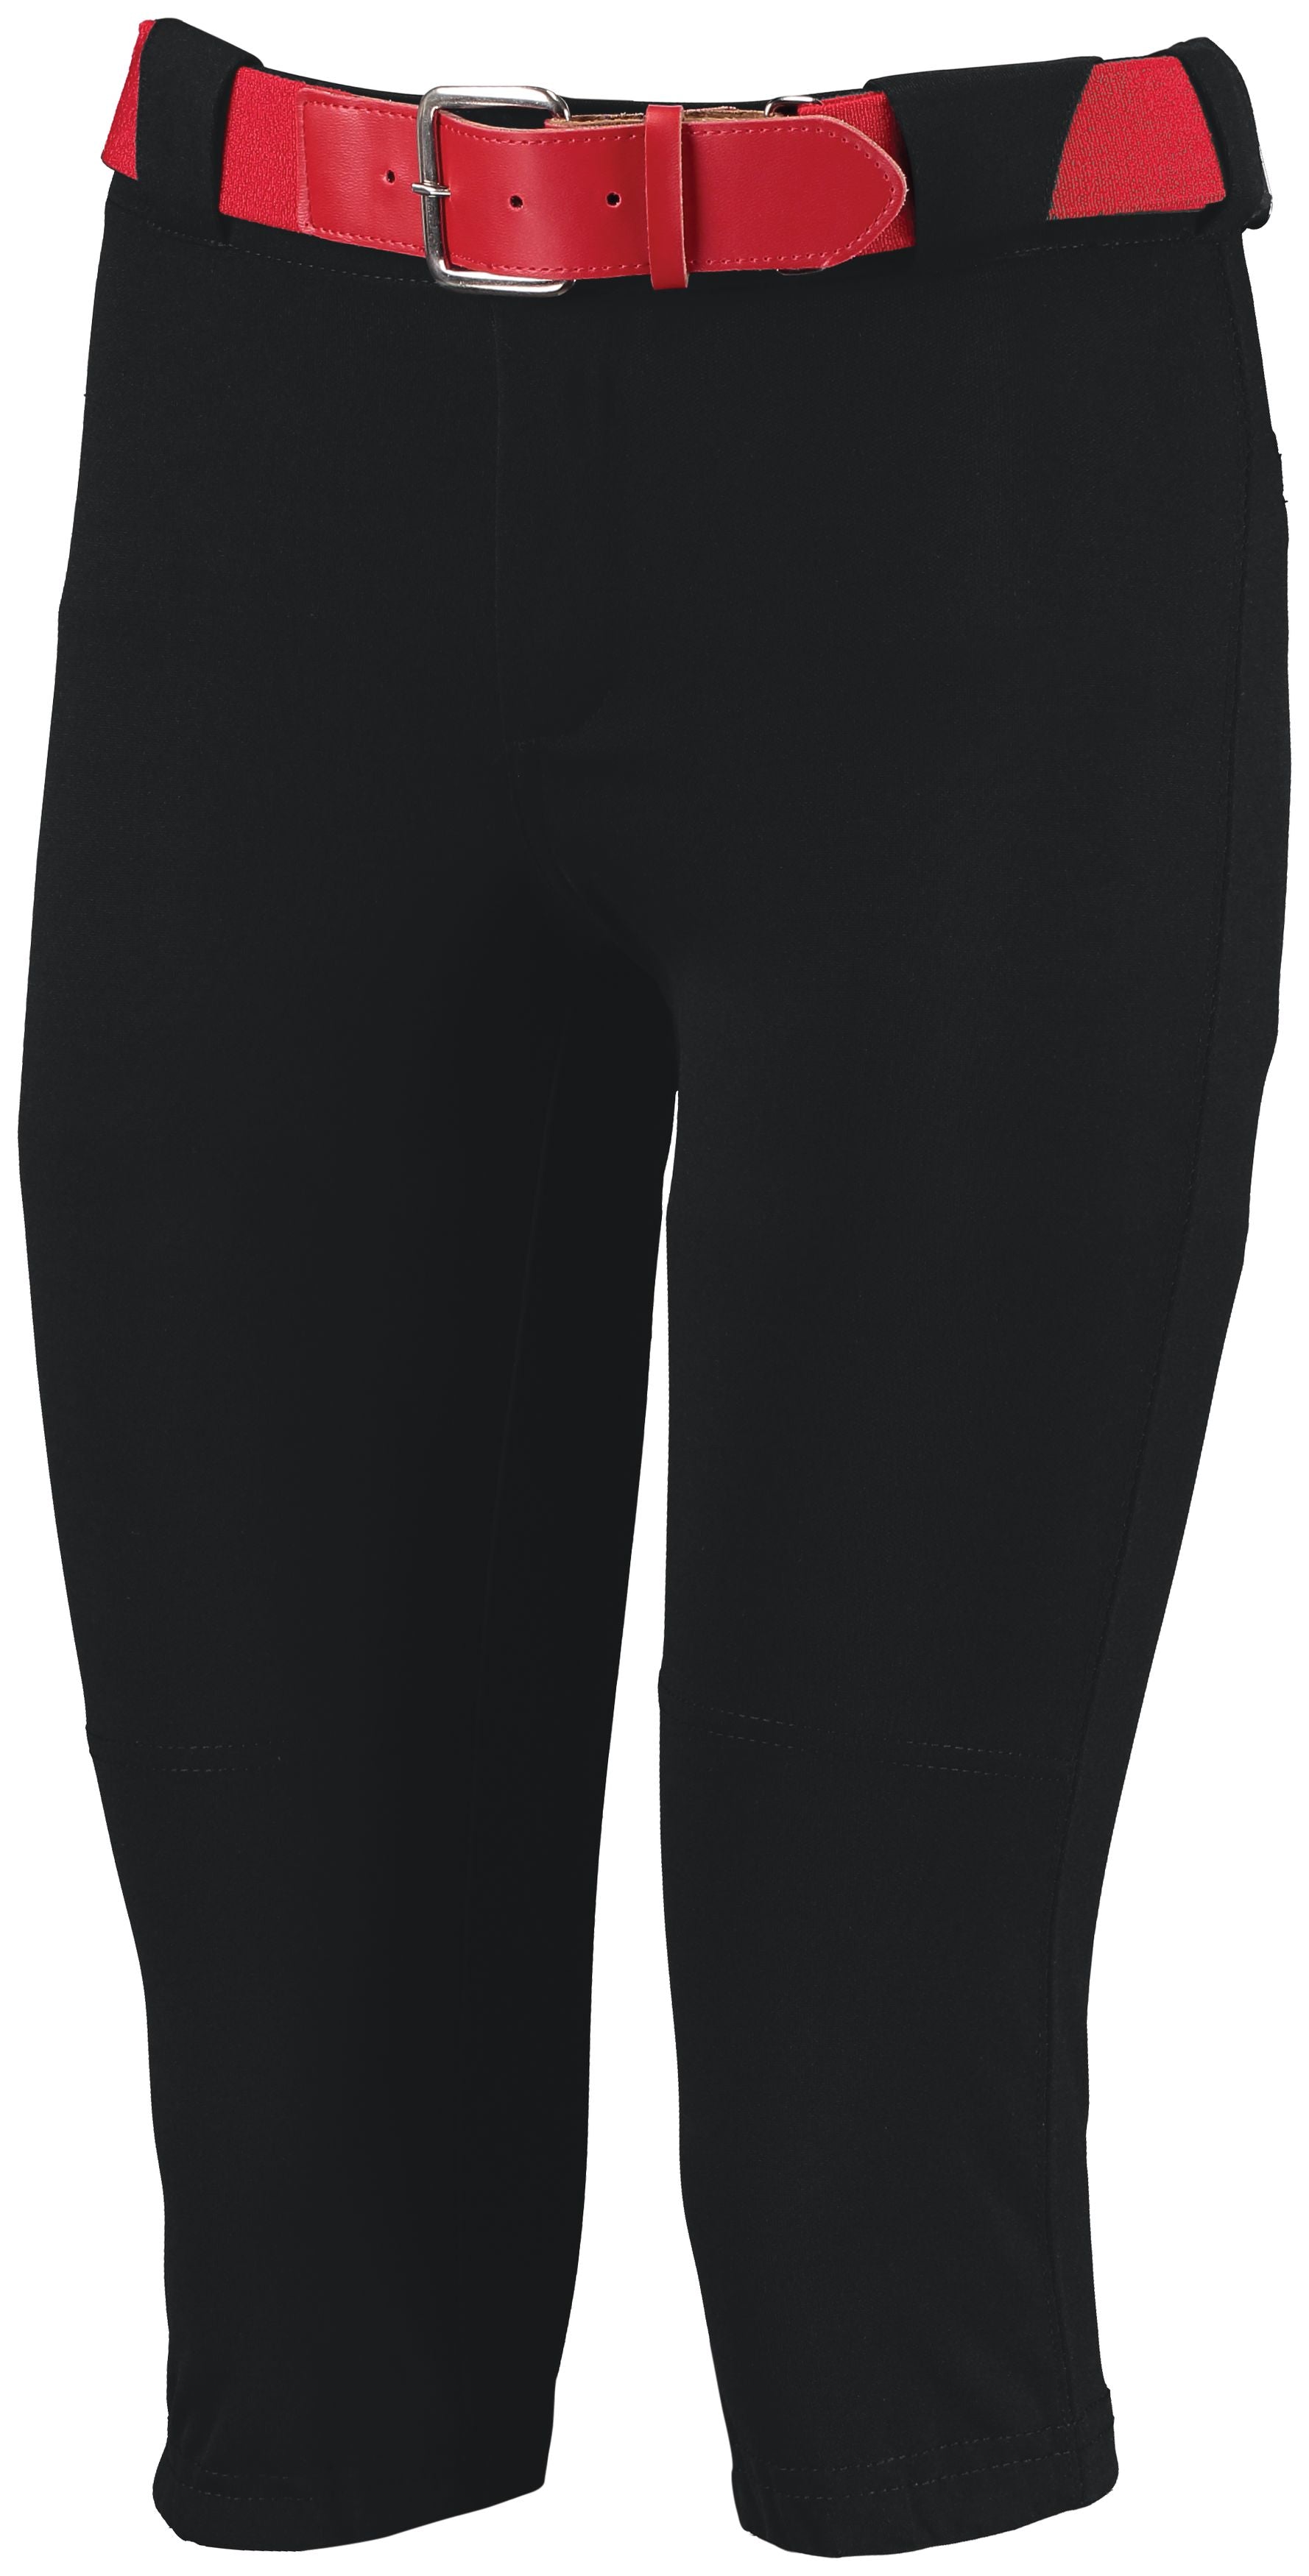 Russell Athletic Girls Low Rise Knicker Length Pant in Black  -Part of the Girls, Softball, Russell-Athletic-Products product lines at KanaleyCreations.com